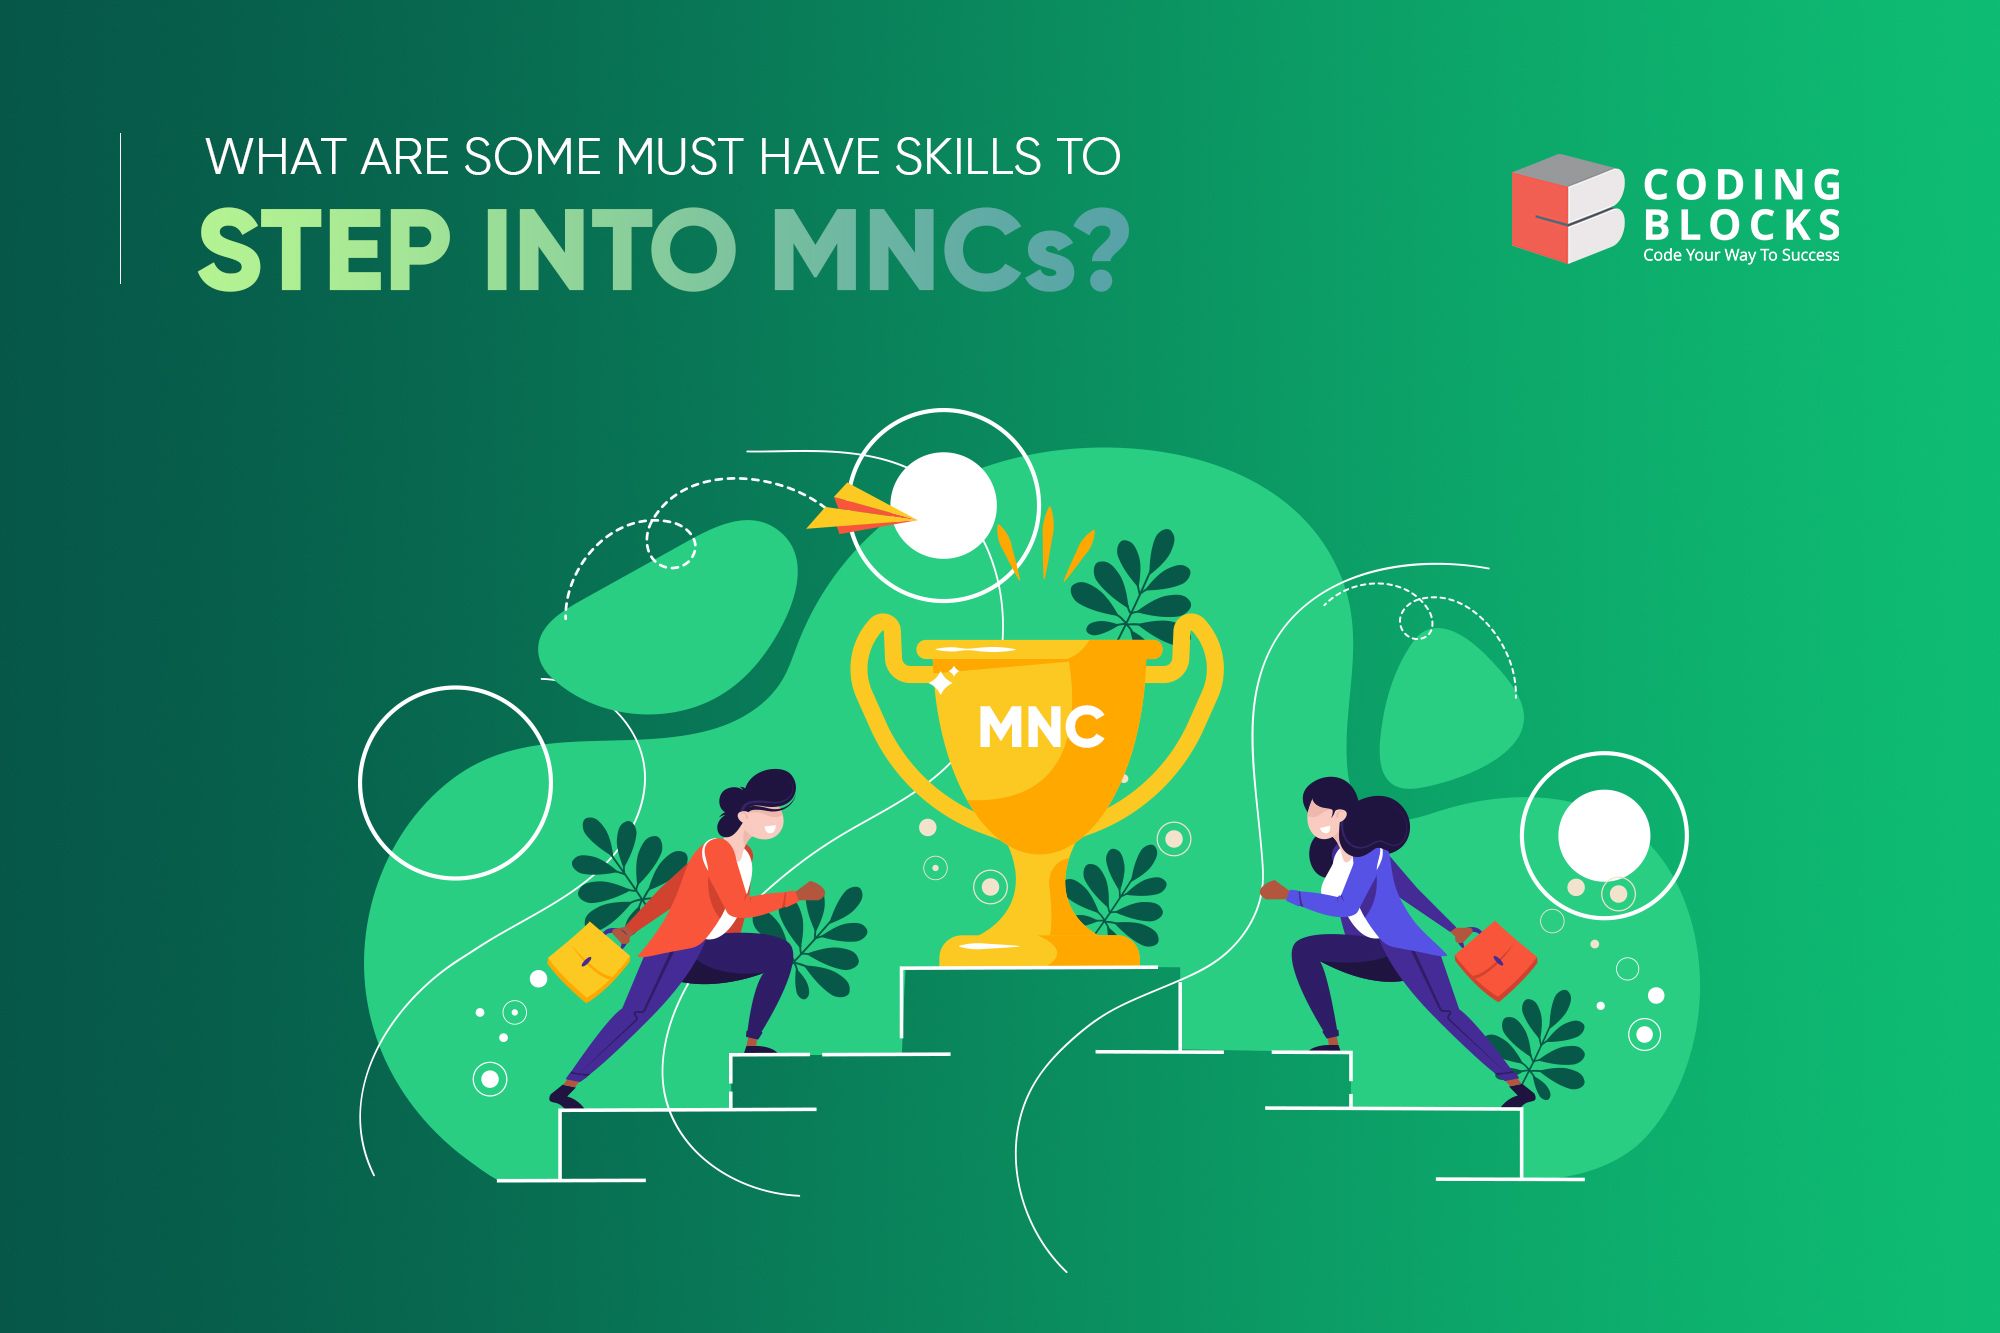 What are some must-have skills to step into MNCs?